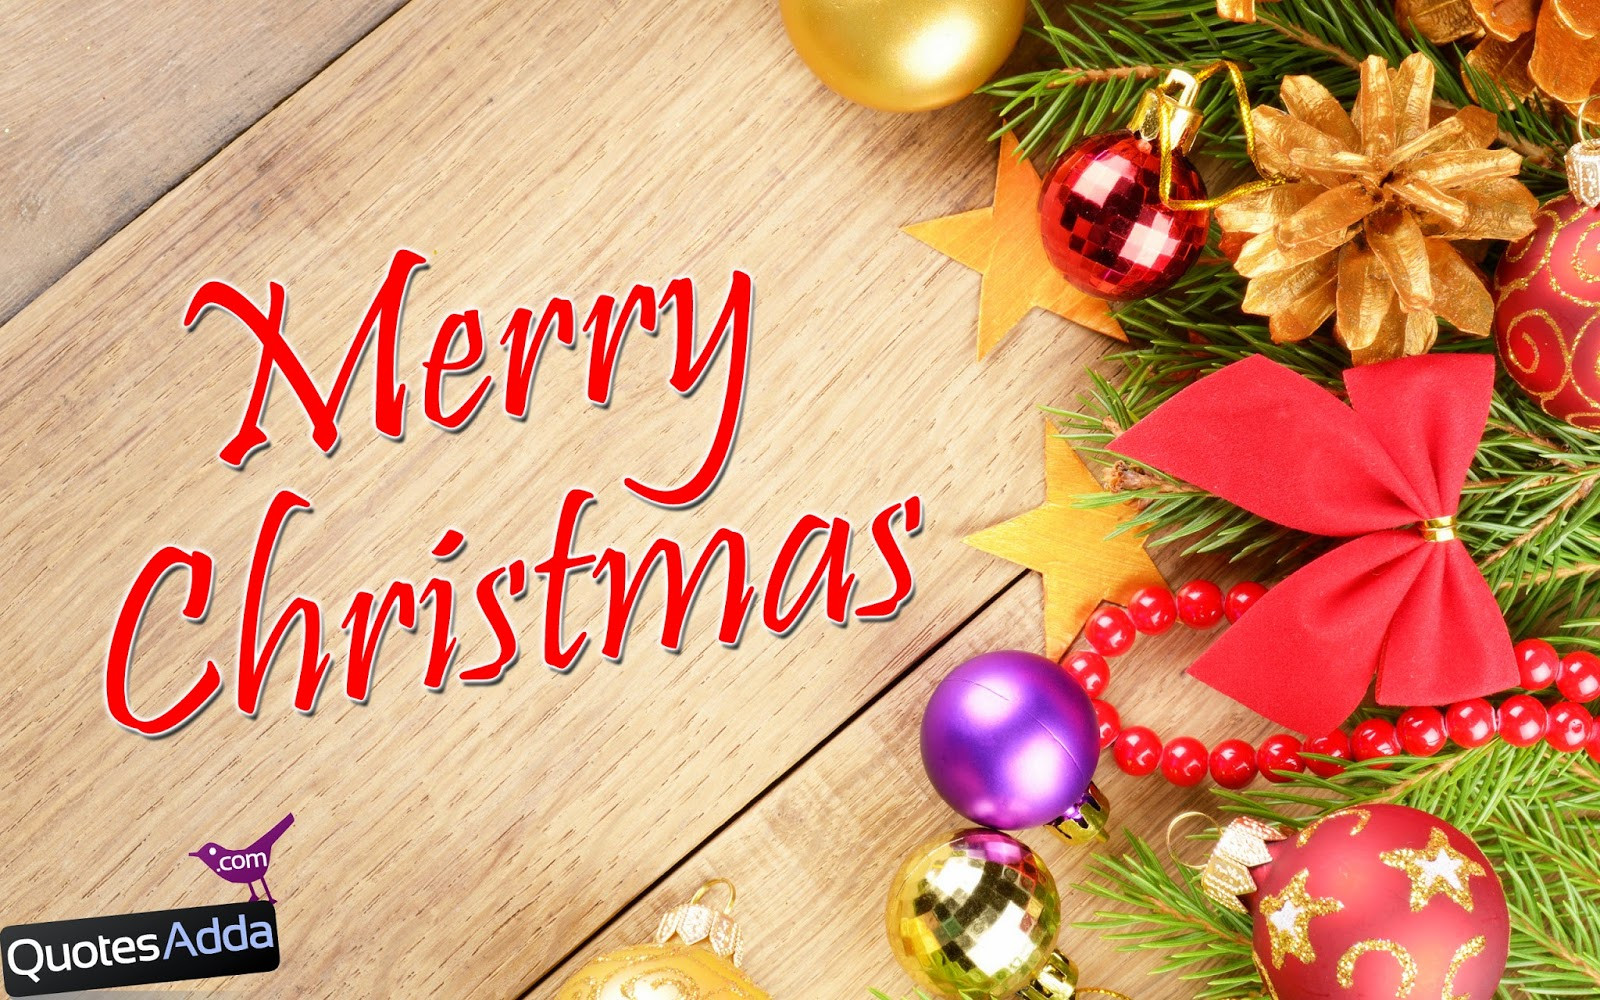 Merry Christmas Images And Quotes
 Latest Merry Christmas 2014 Message Wallpapers And